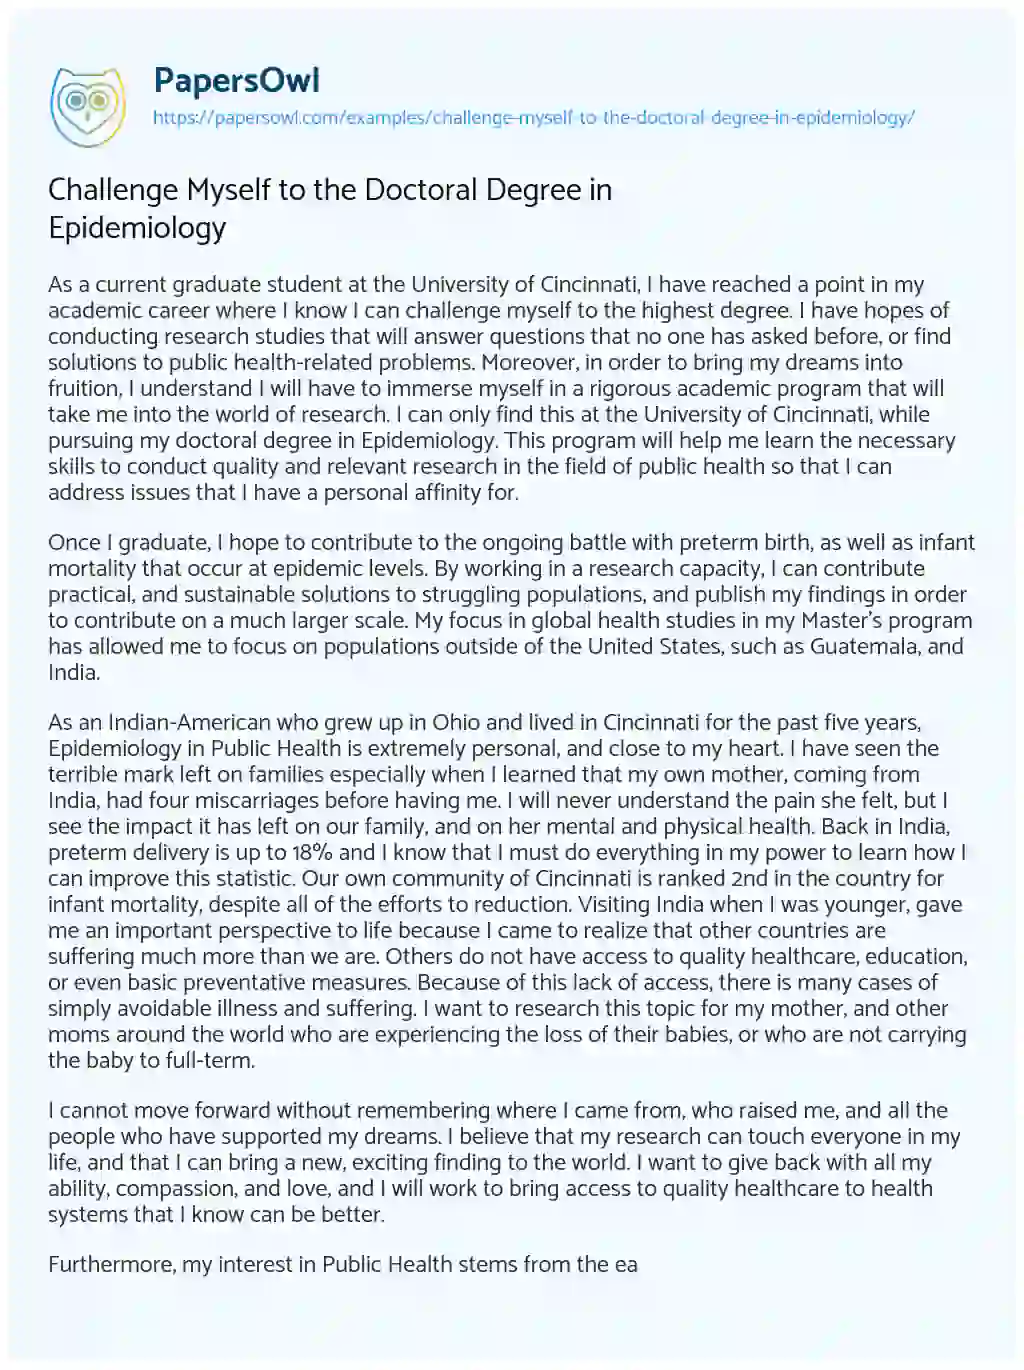 Essay on Challenge myself to the Doctoral Degree in Epidemiology